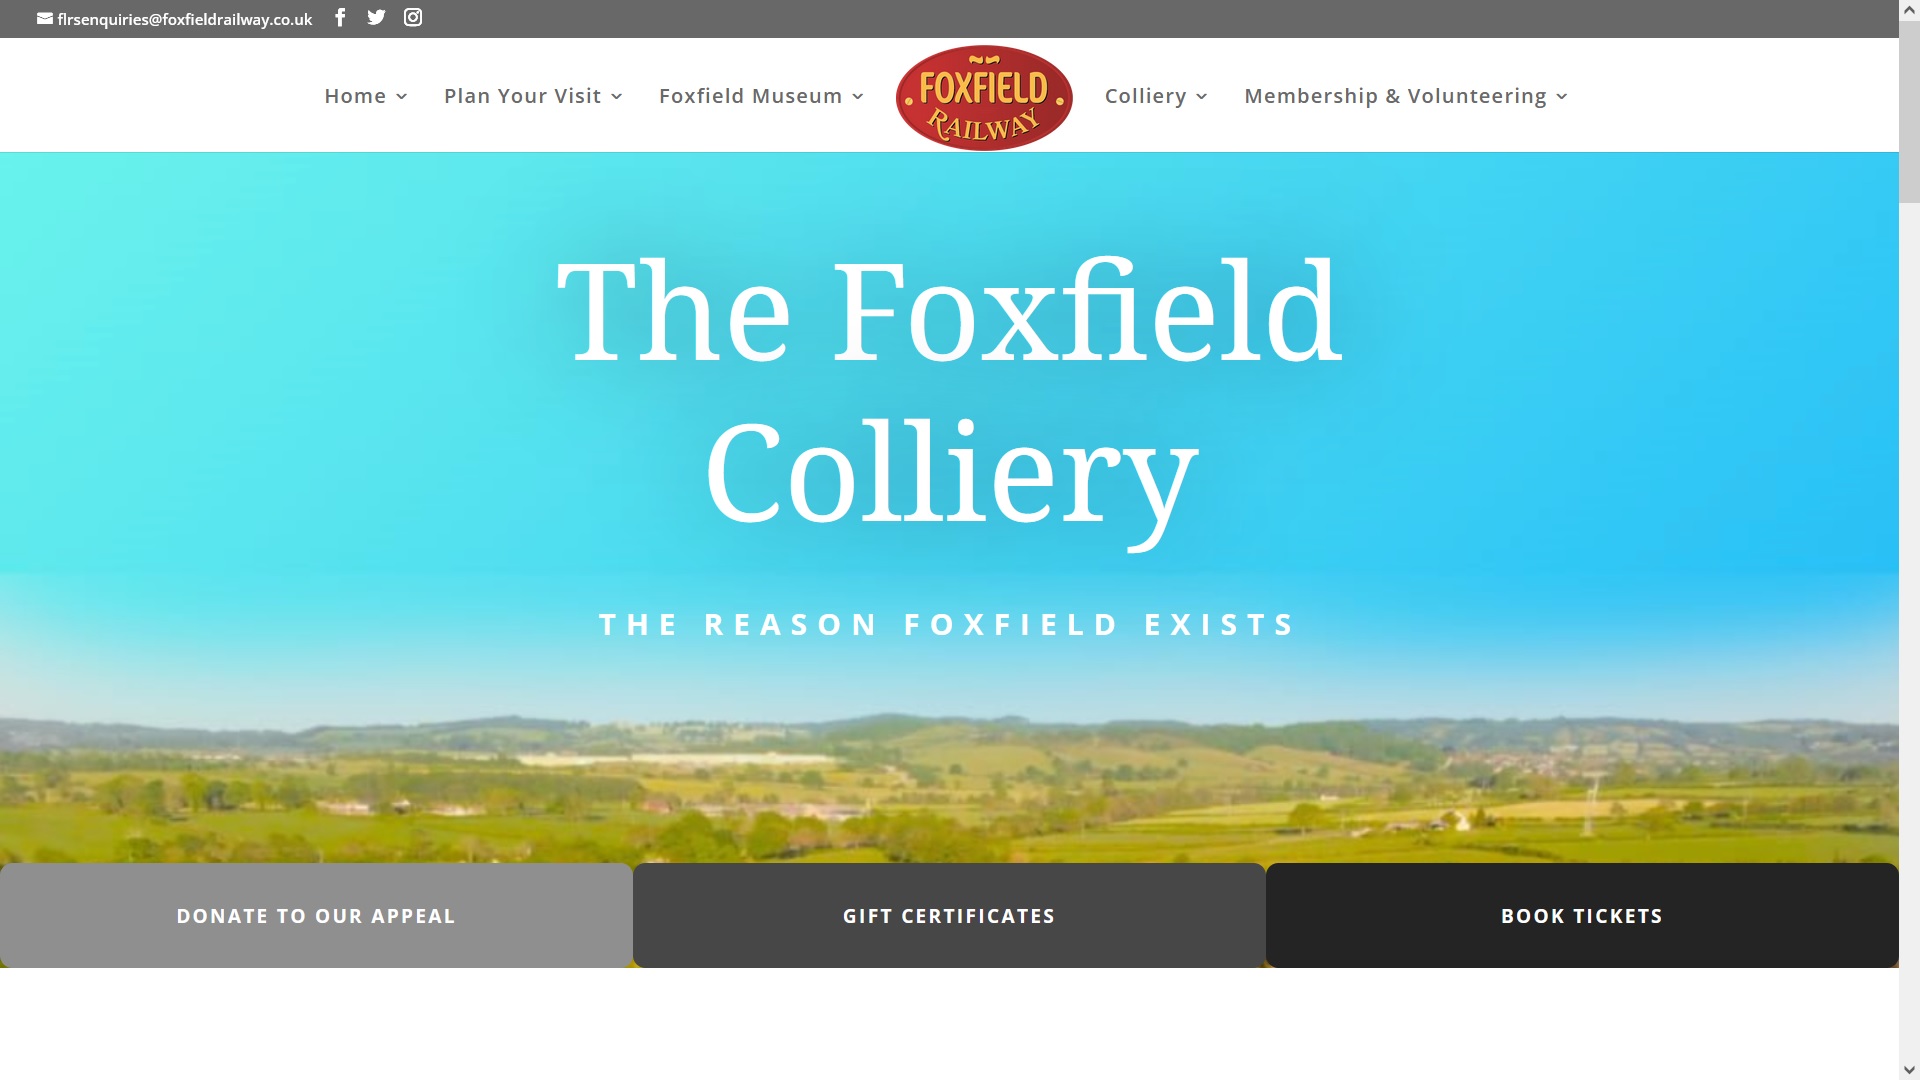 image of the Foxfield Colliery website